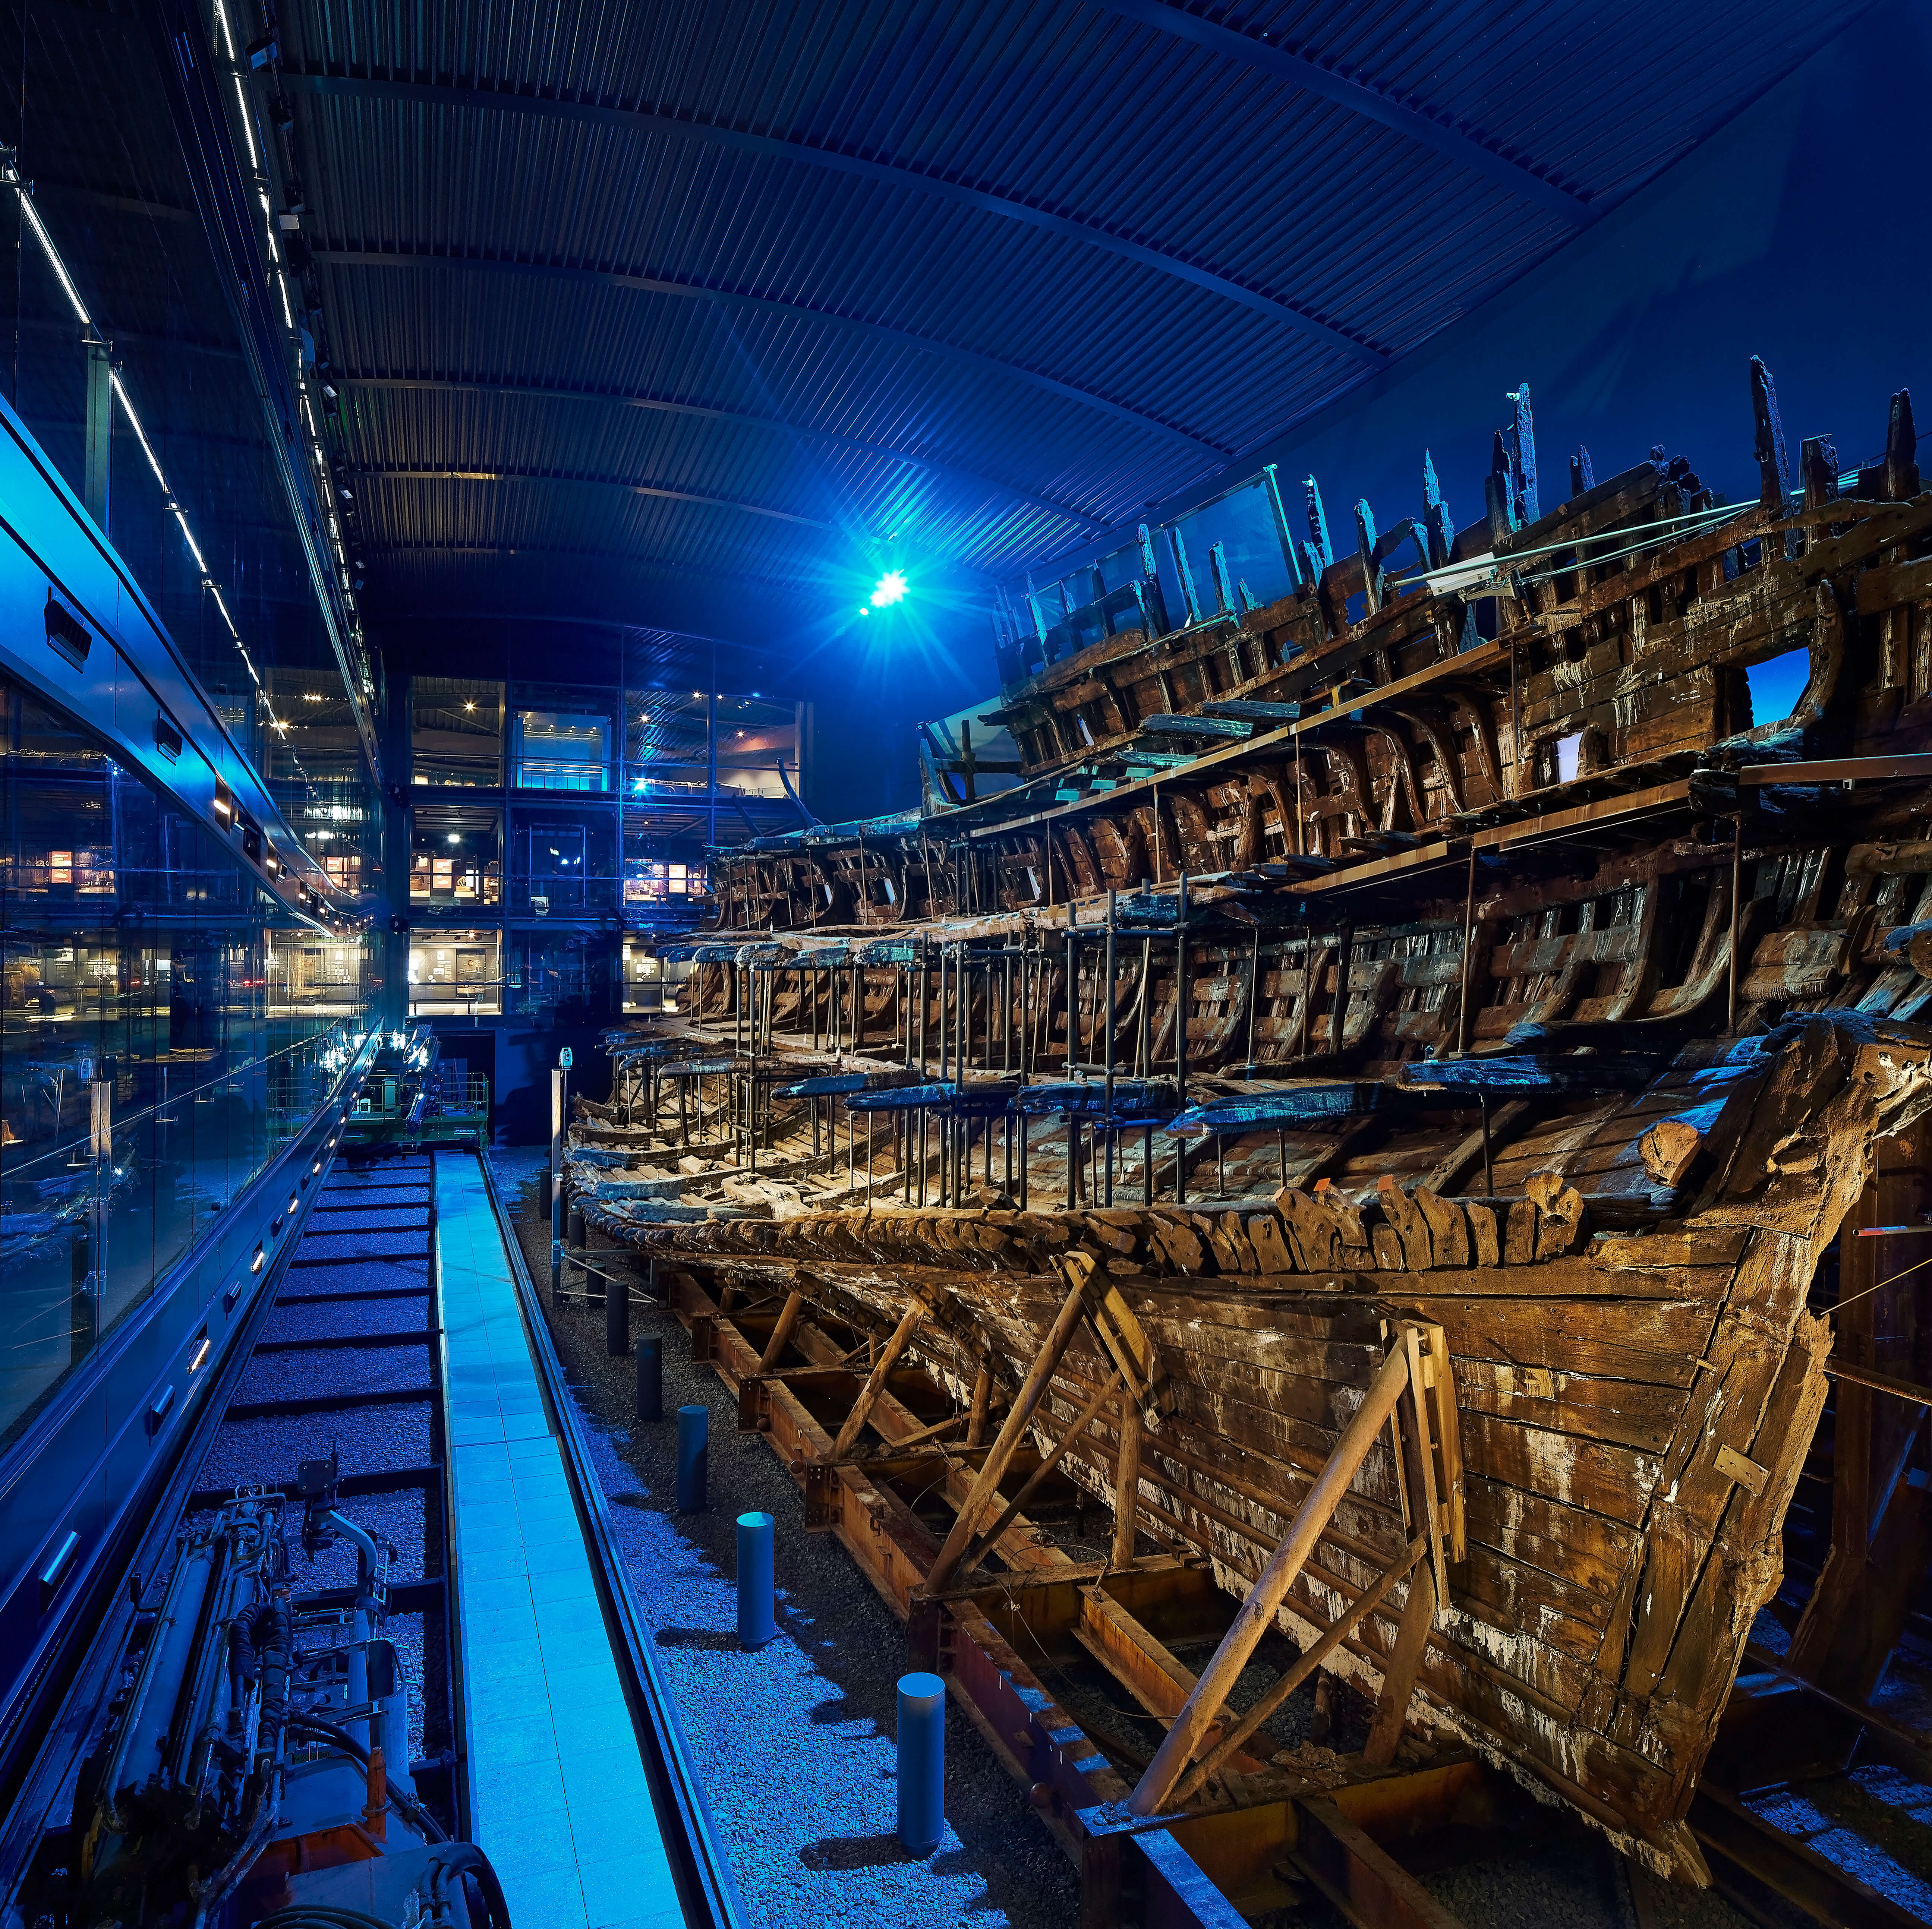 Ship vreck Mary rose